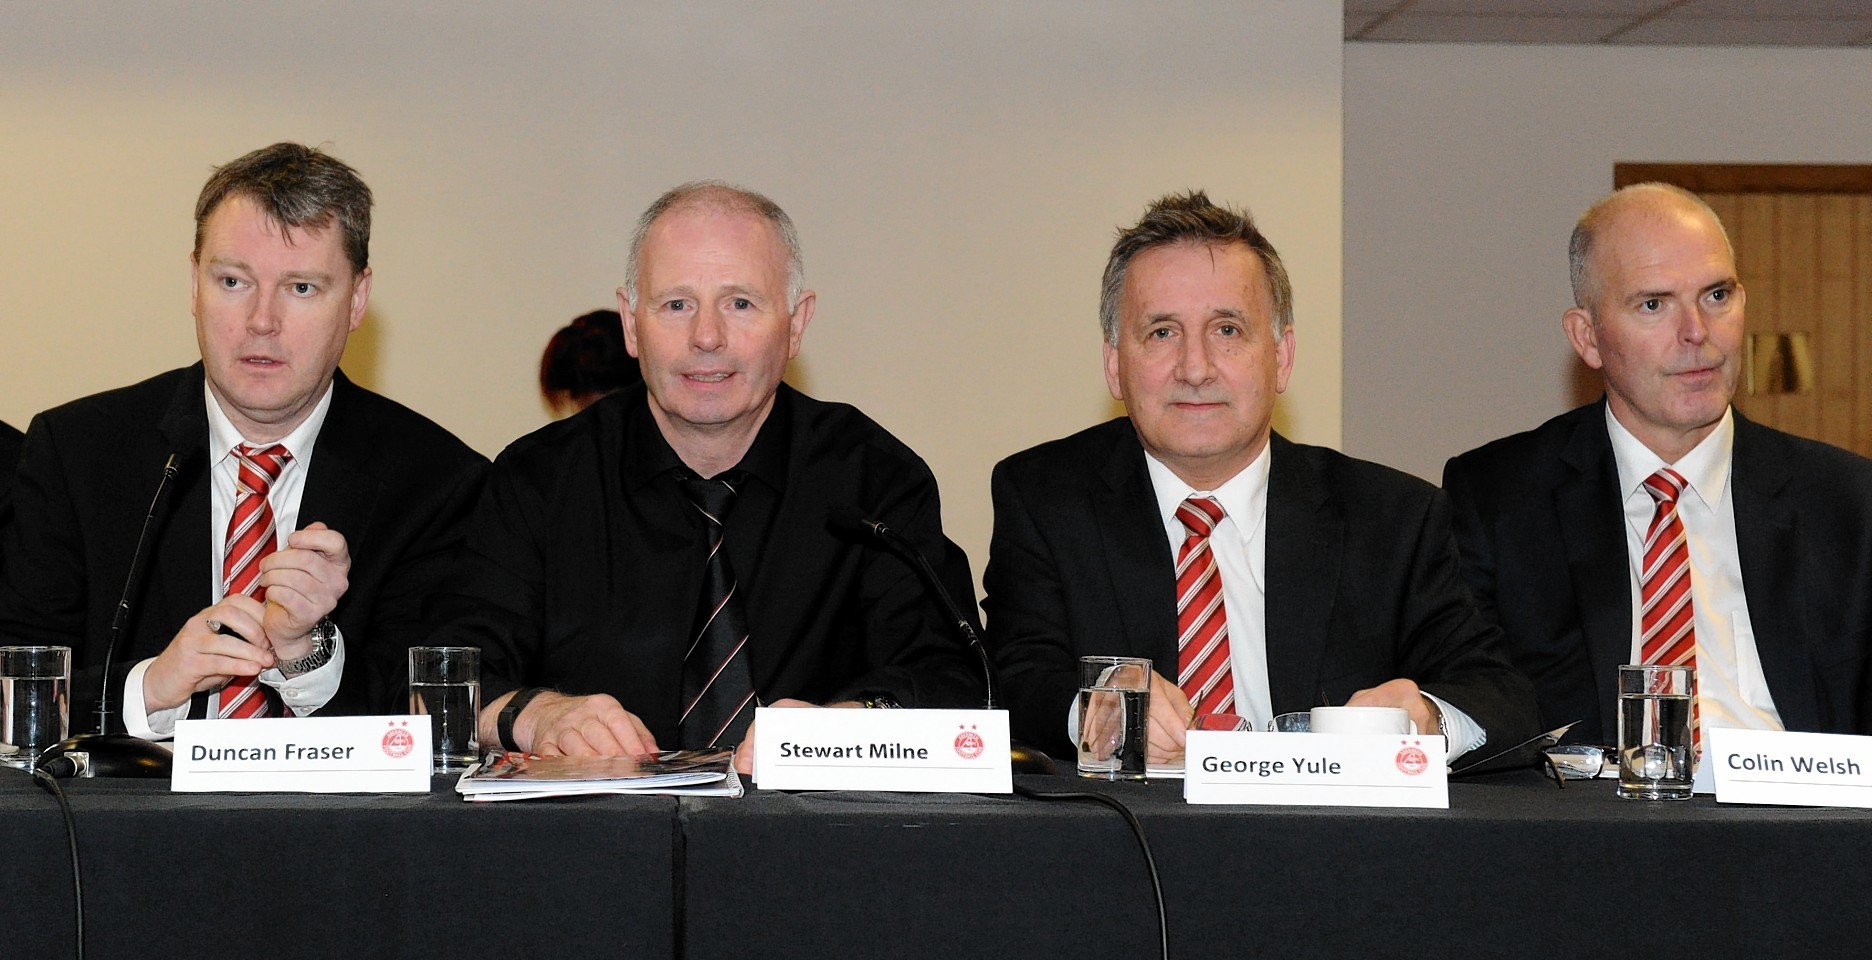 uncan Fraser, Stewart Milne, George Yule and Colin Welsh at the club's AGM last year